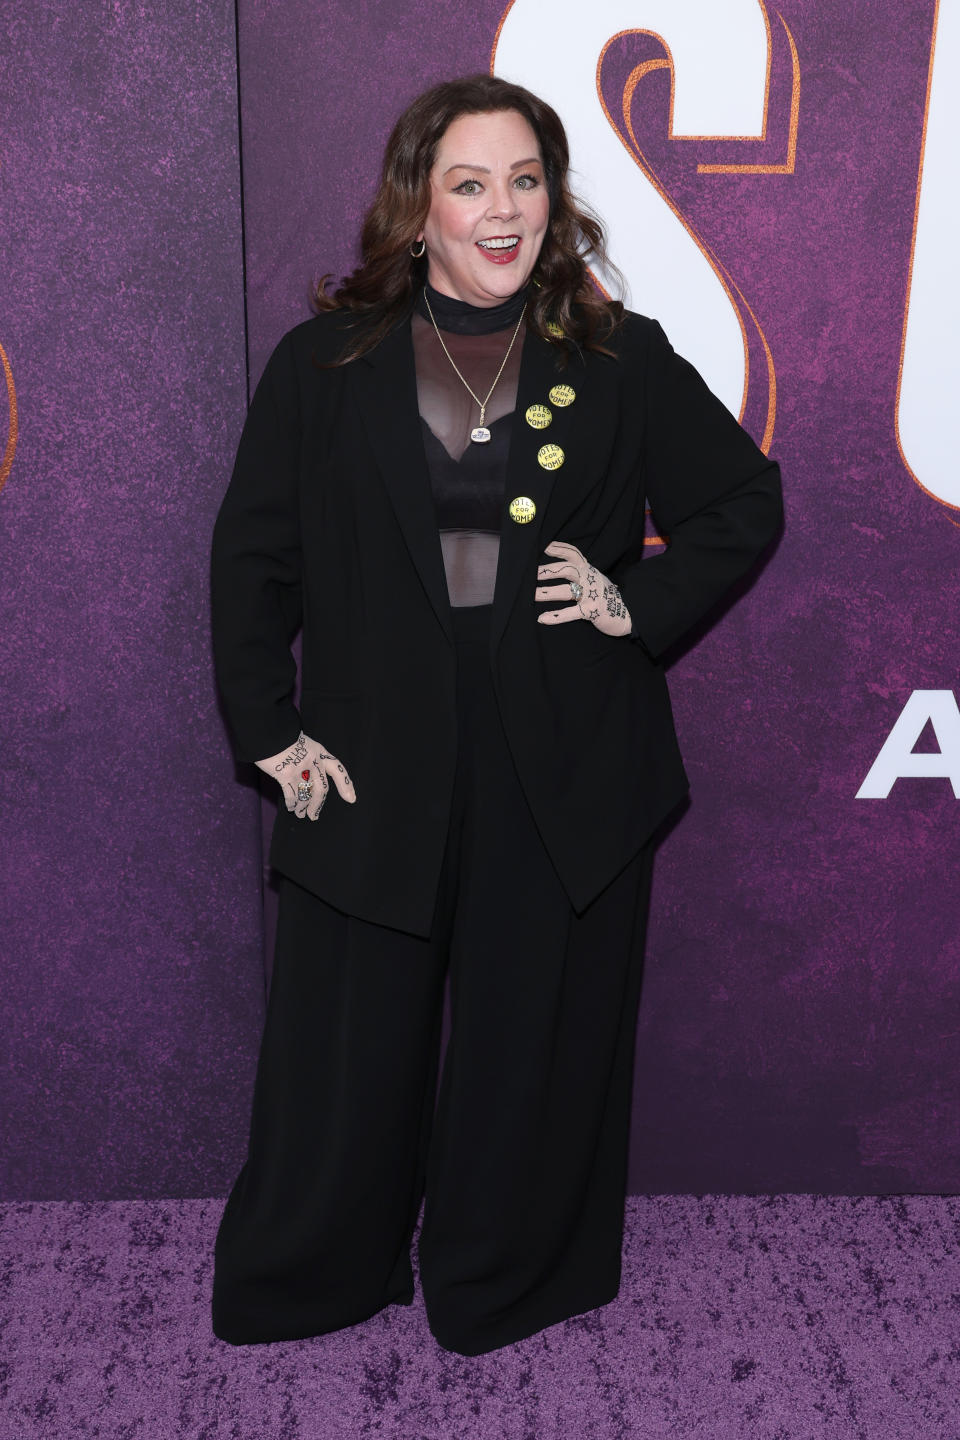 NEW YORK, NEW YORK - APRIL 18: Melissa McCarthy attends the "Suffs" Broadway Opening Night at Music Box Theatre on April 18, 2024 in New York City. (Photo by Cindy Ord/Getty Images)